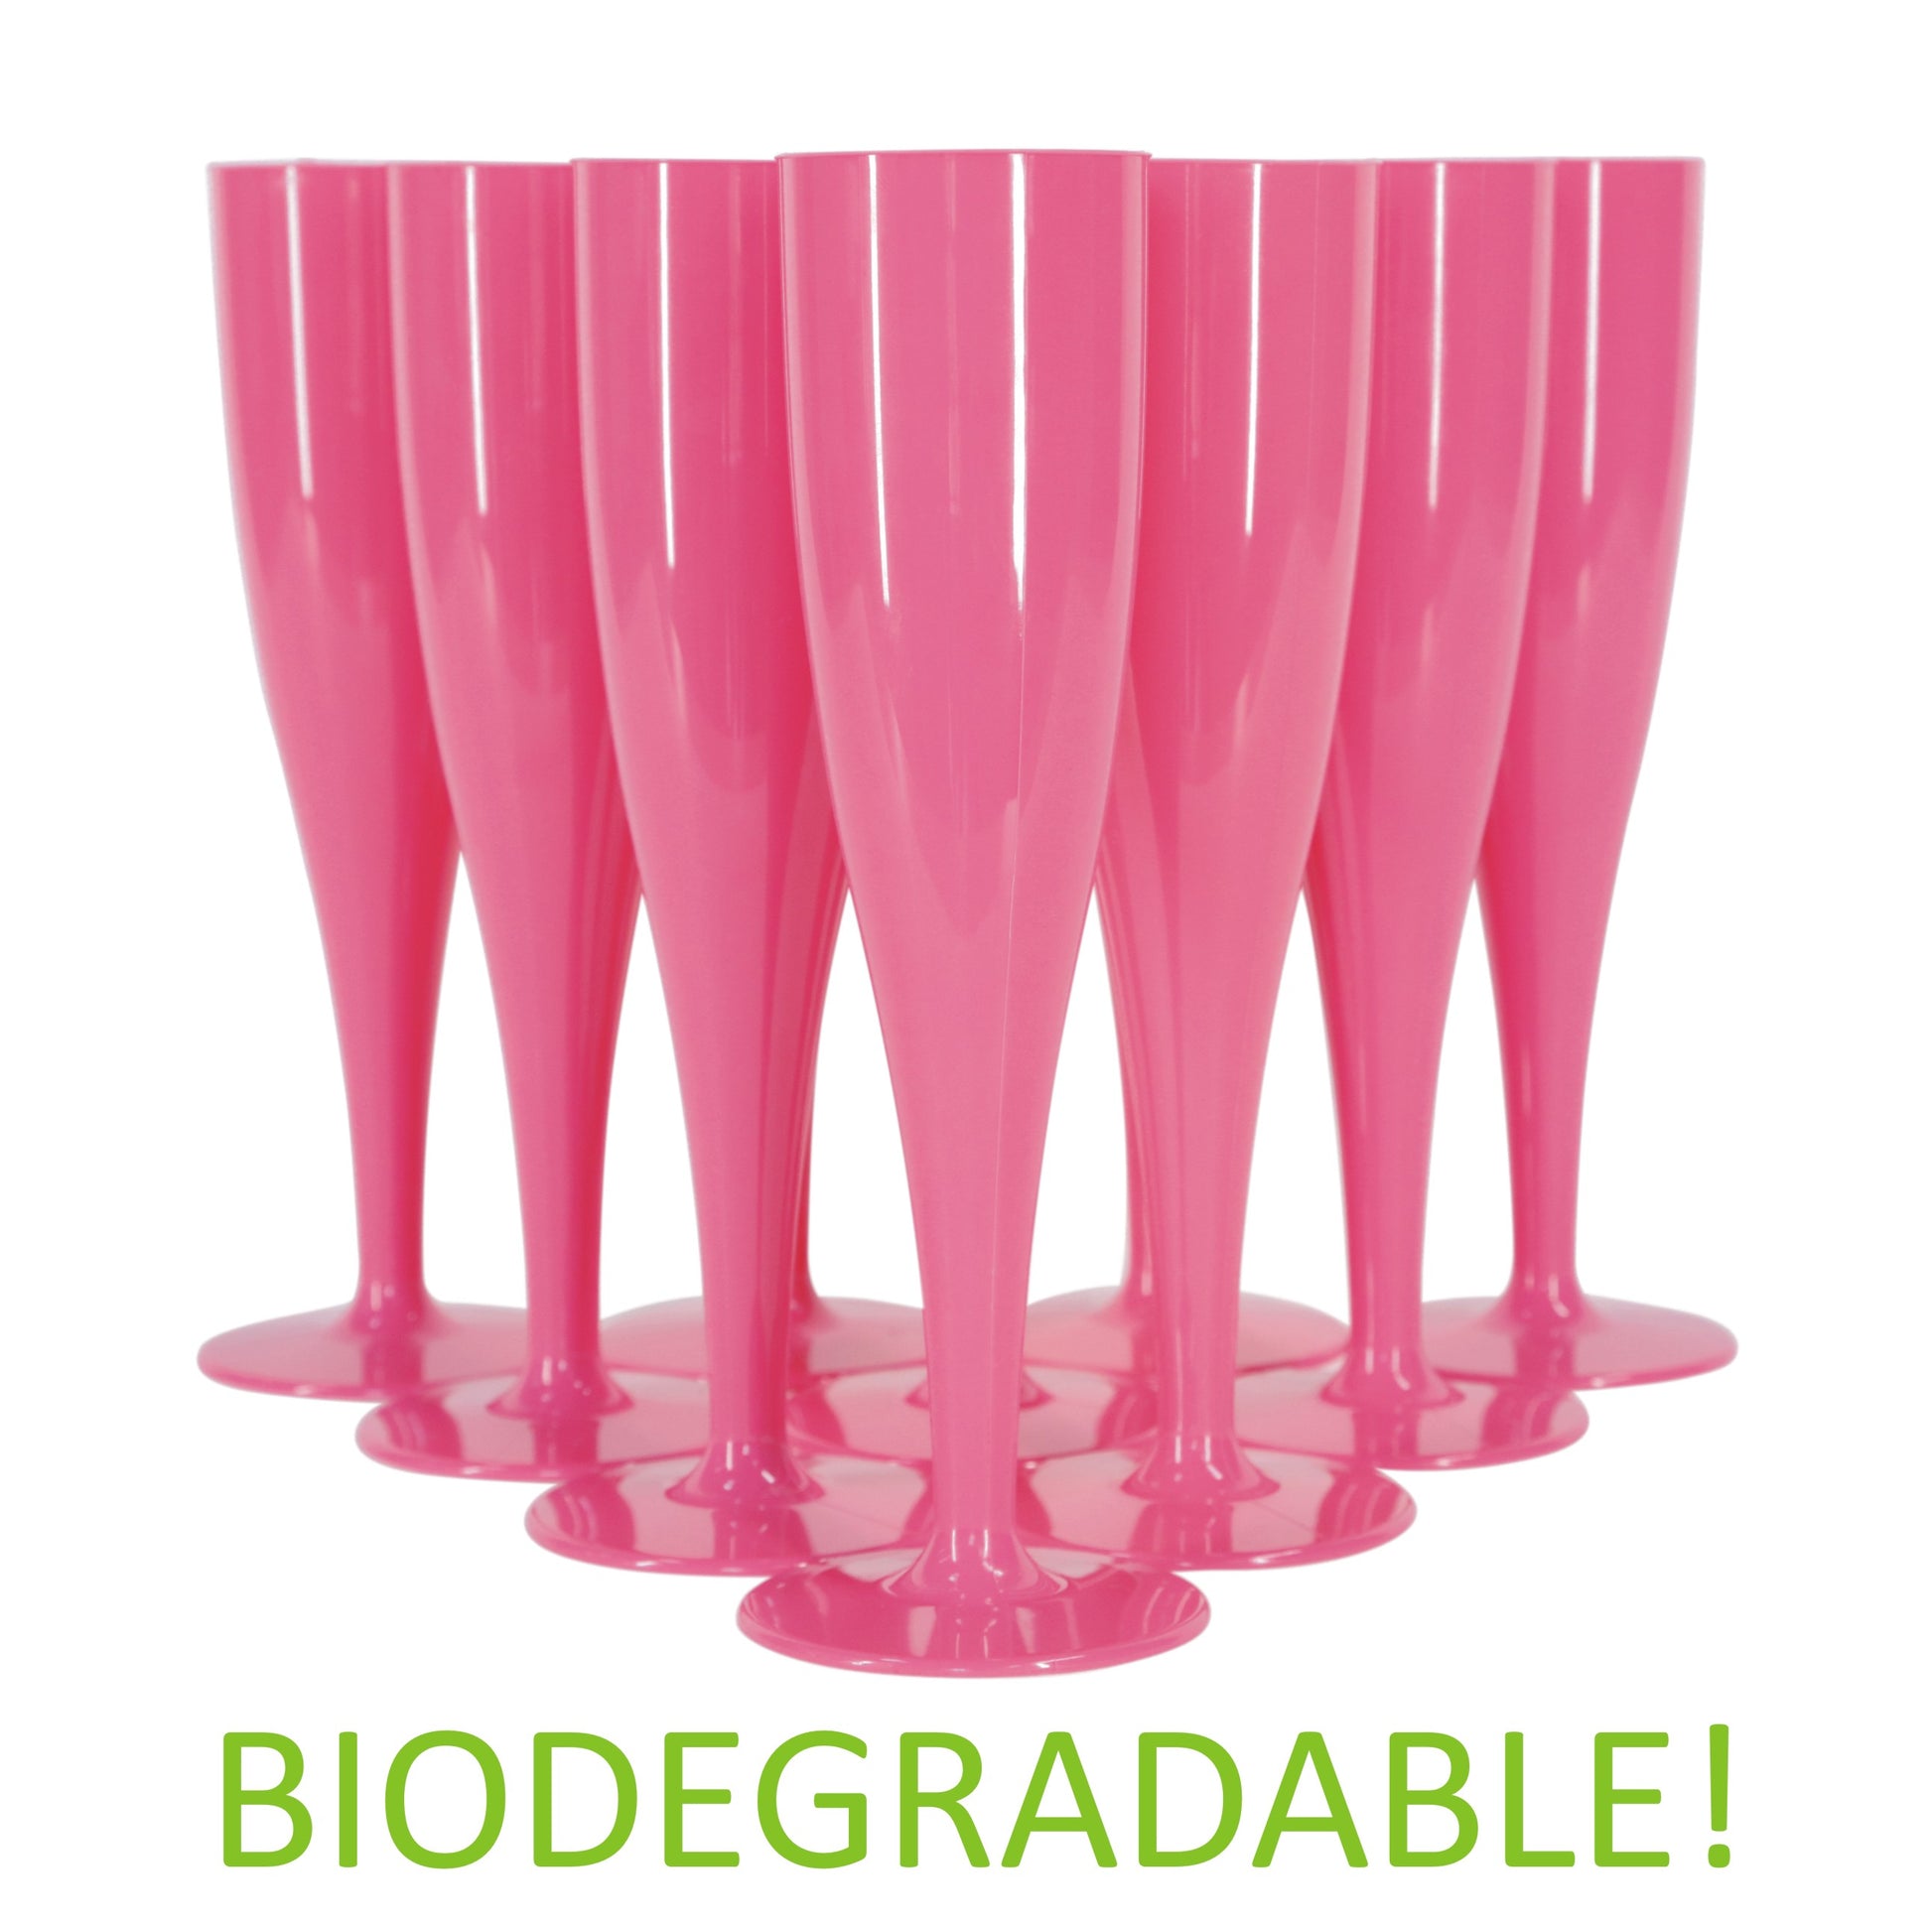 100 x Pink Prosecco Flutes – Made from Biodegradable Material in Glossy Fuchsia Colour 1-Piece Champagne Glass (Pack of 100 Glasses) Hen Do-5056020186762-EY-PP-116-Product Pro-Champagne Flute, Champagne Glasses, Flutes, Pink Flutes, Prosecco Flute, Prosecco Glasses